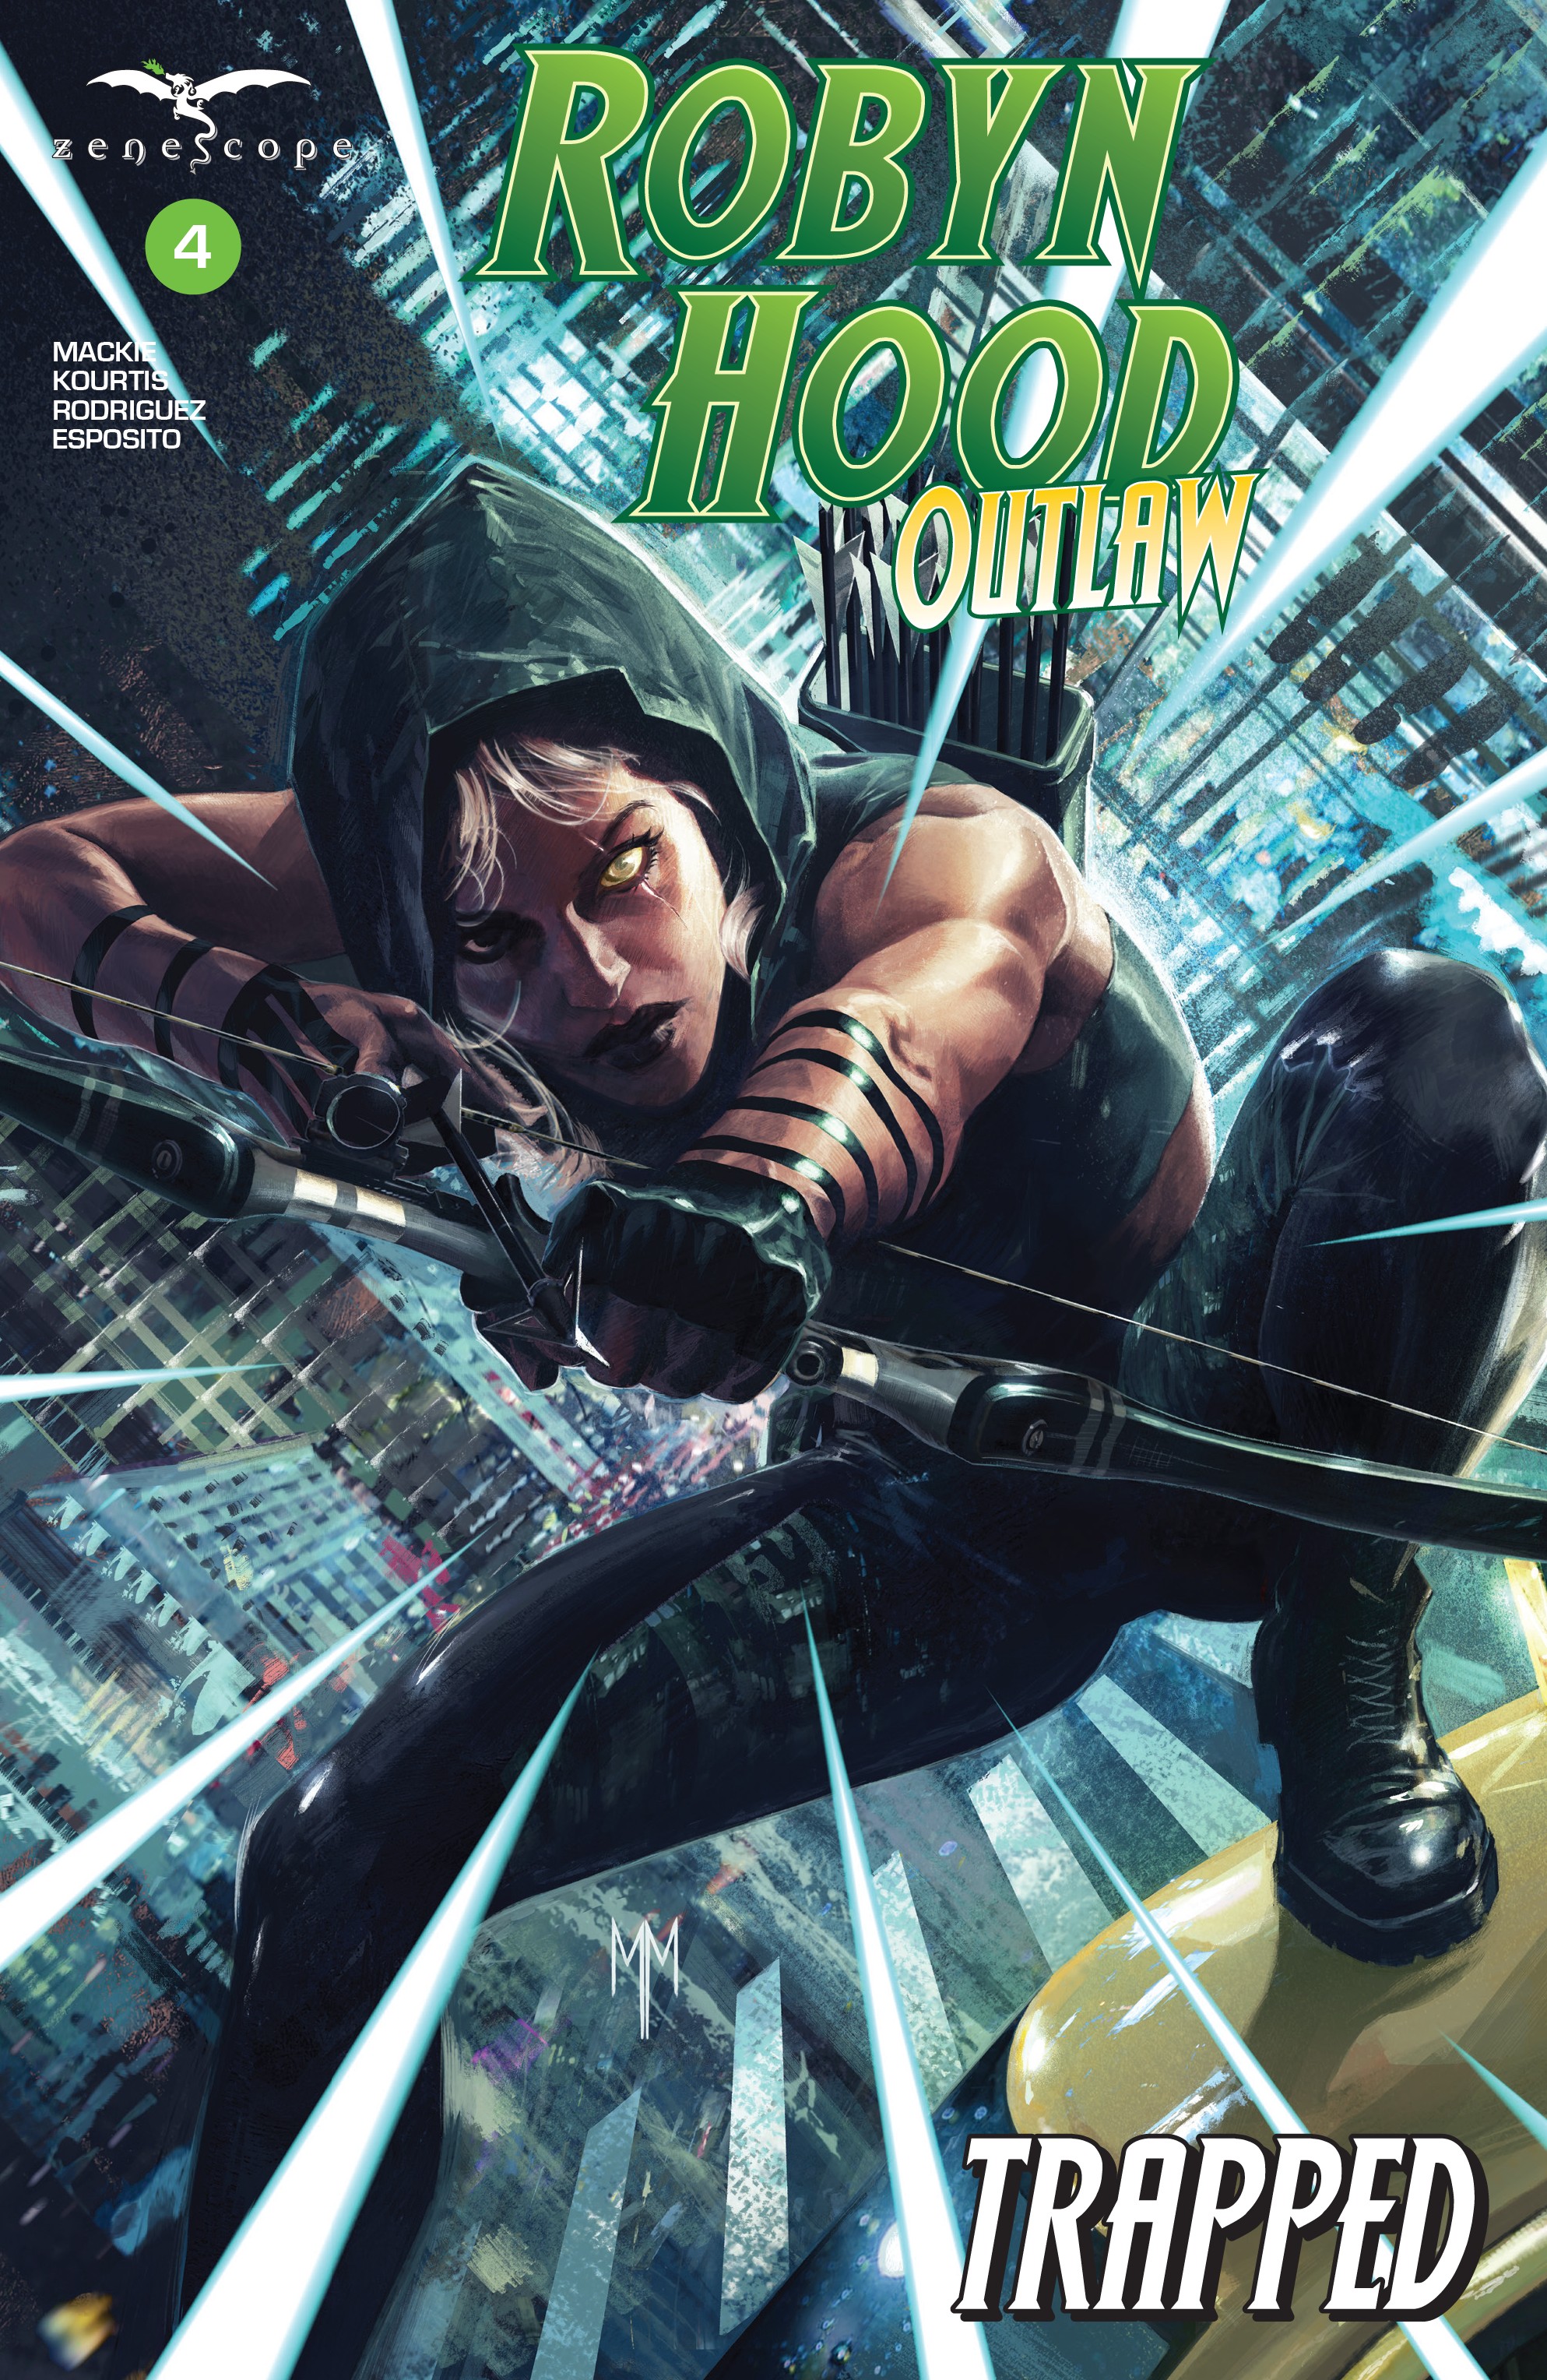 Robyn Hood Outlaw Trapped 004 000